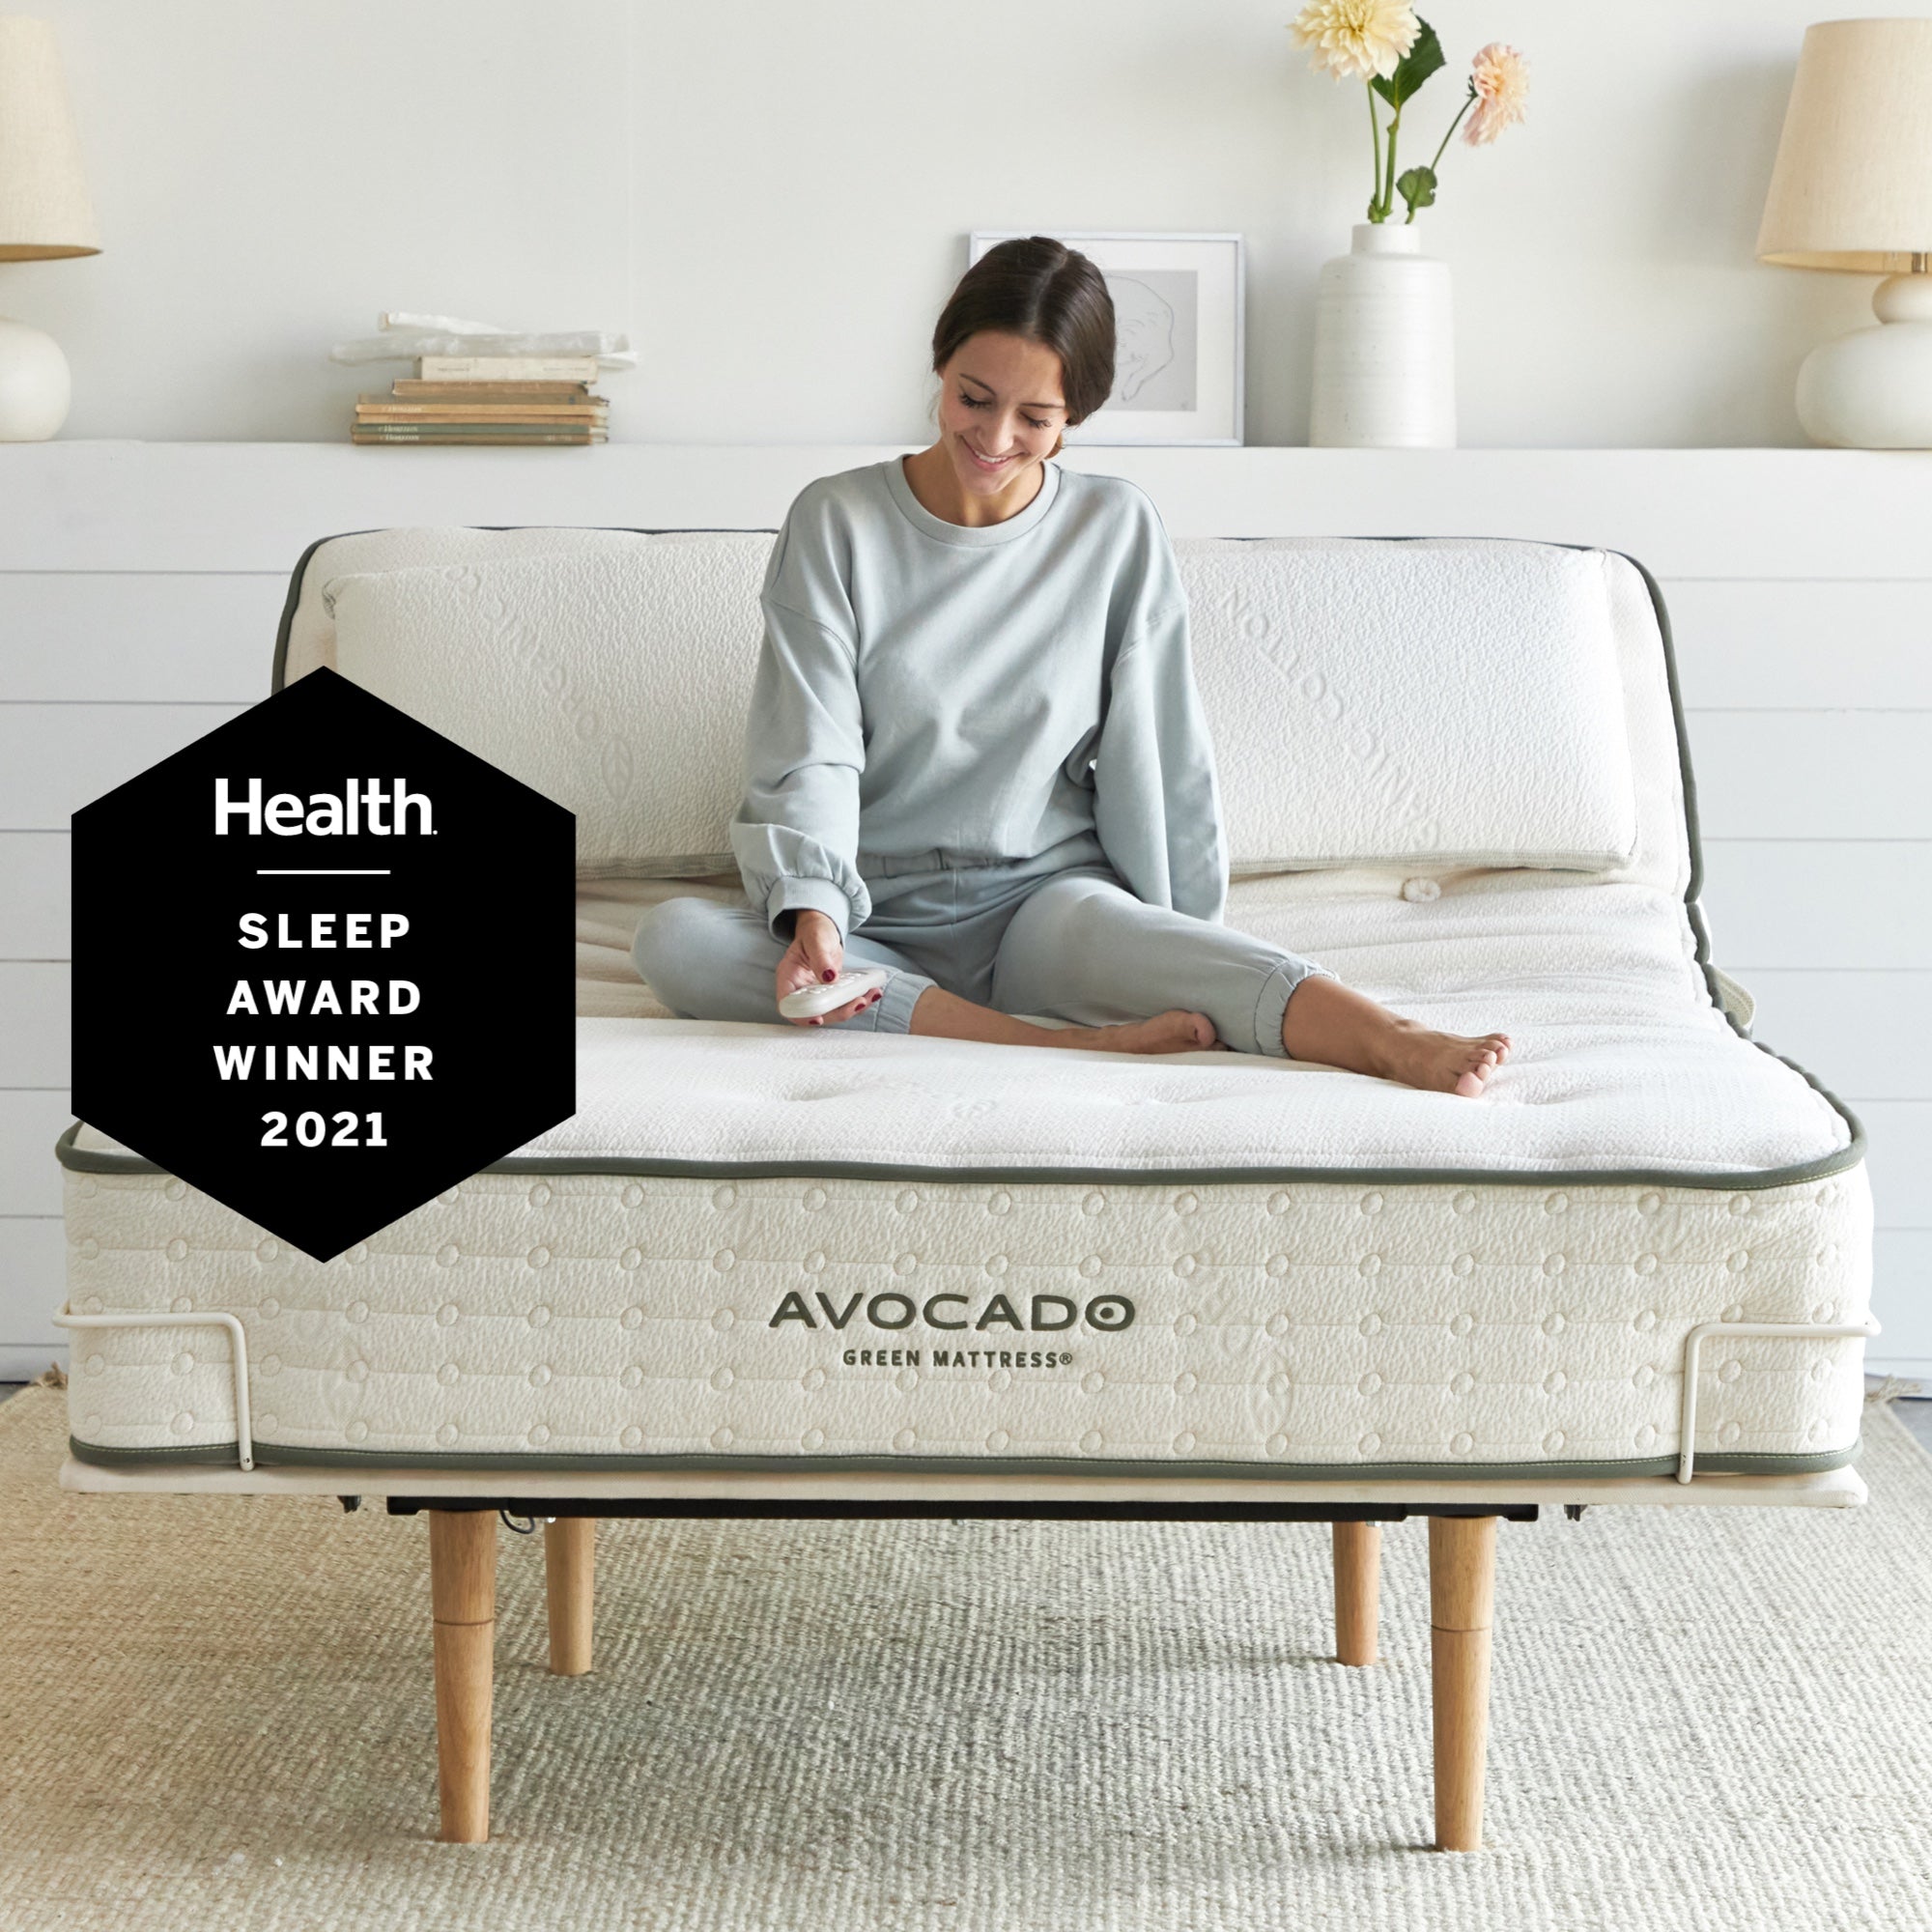 4 Sleep Positions to Try With an Adjustable Bed for Better Health